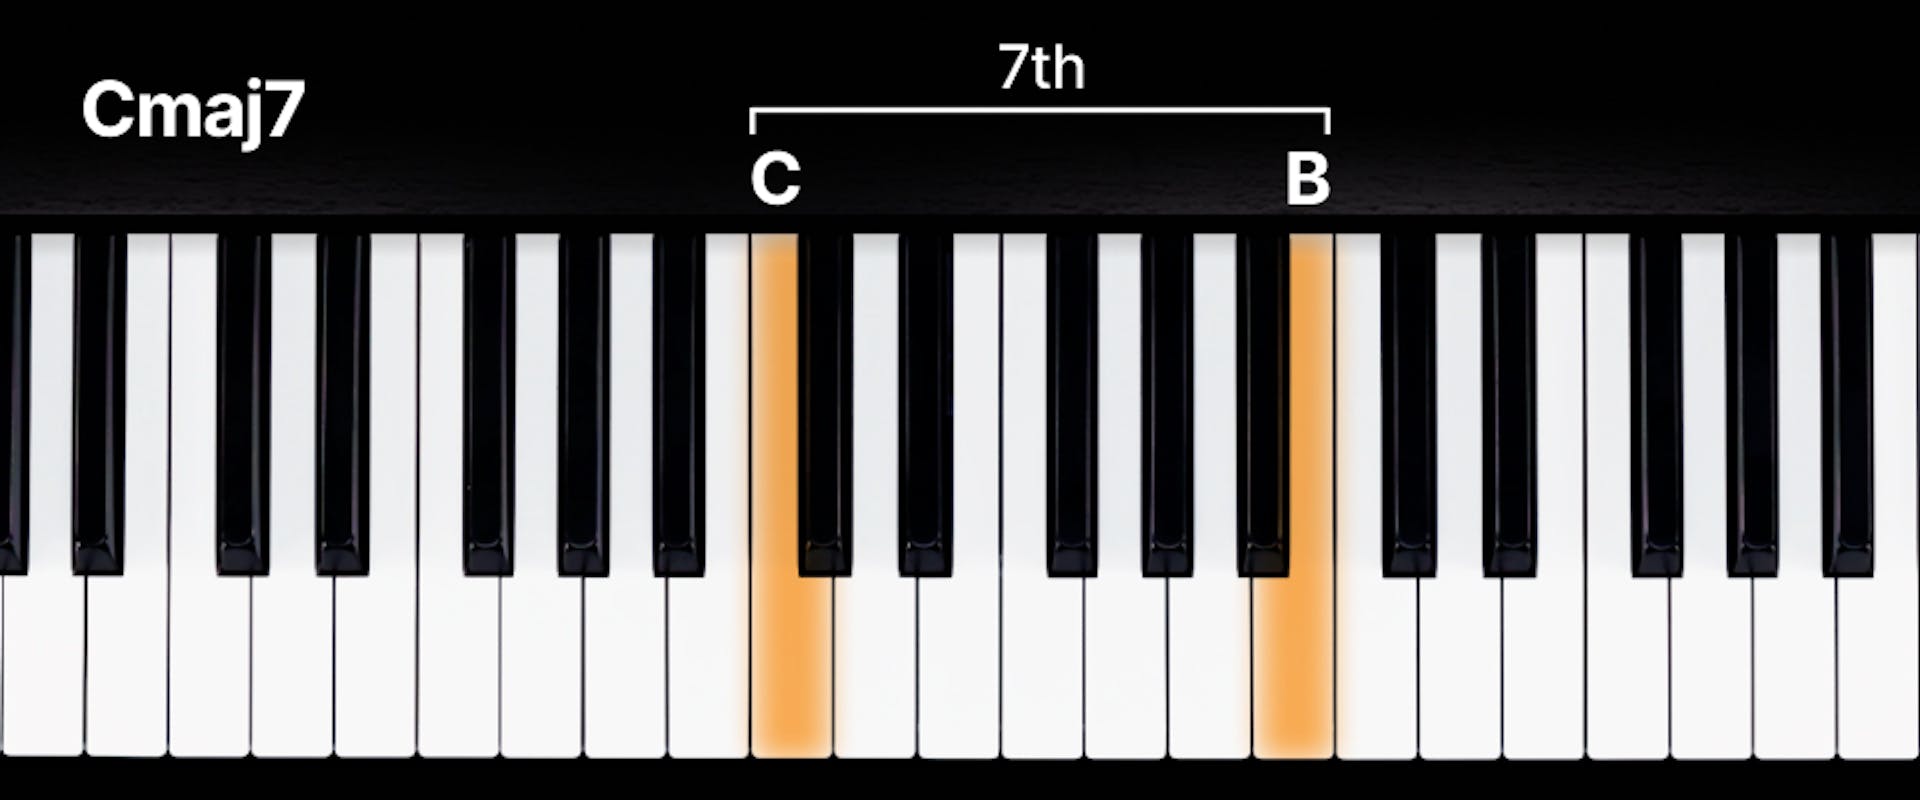 Keyboard with a C major scale marked out 1-7. Major seventh highlighted